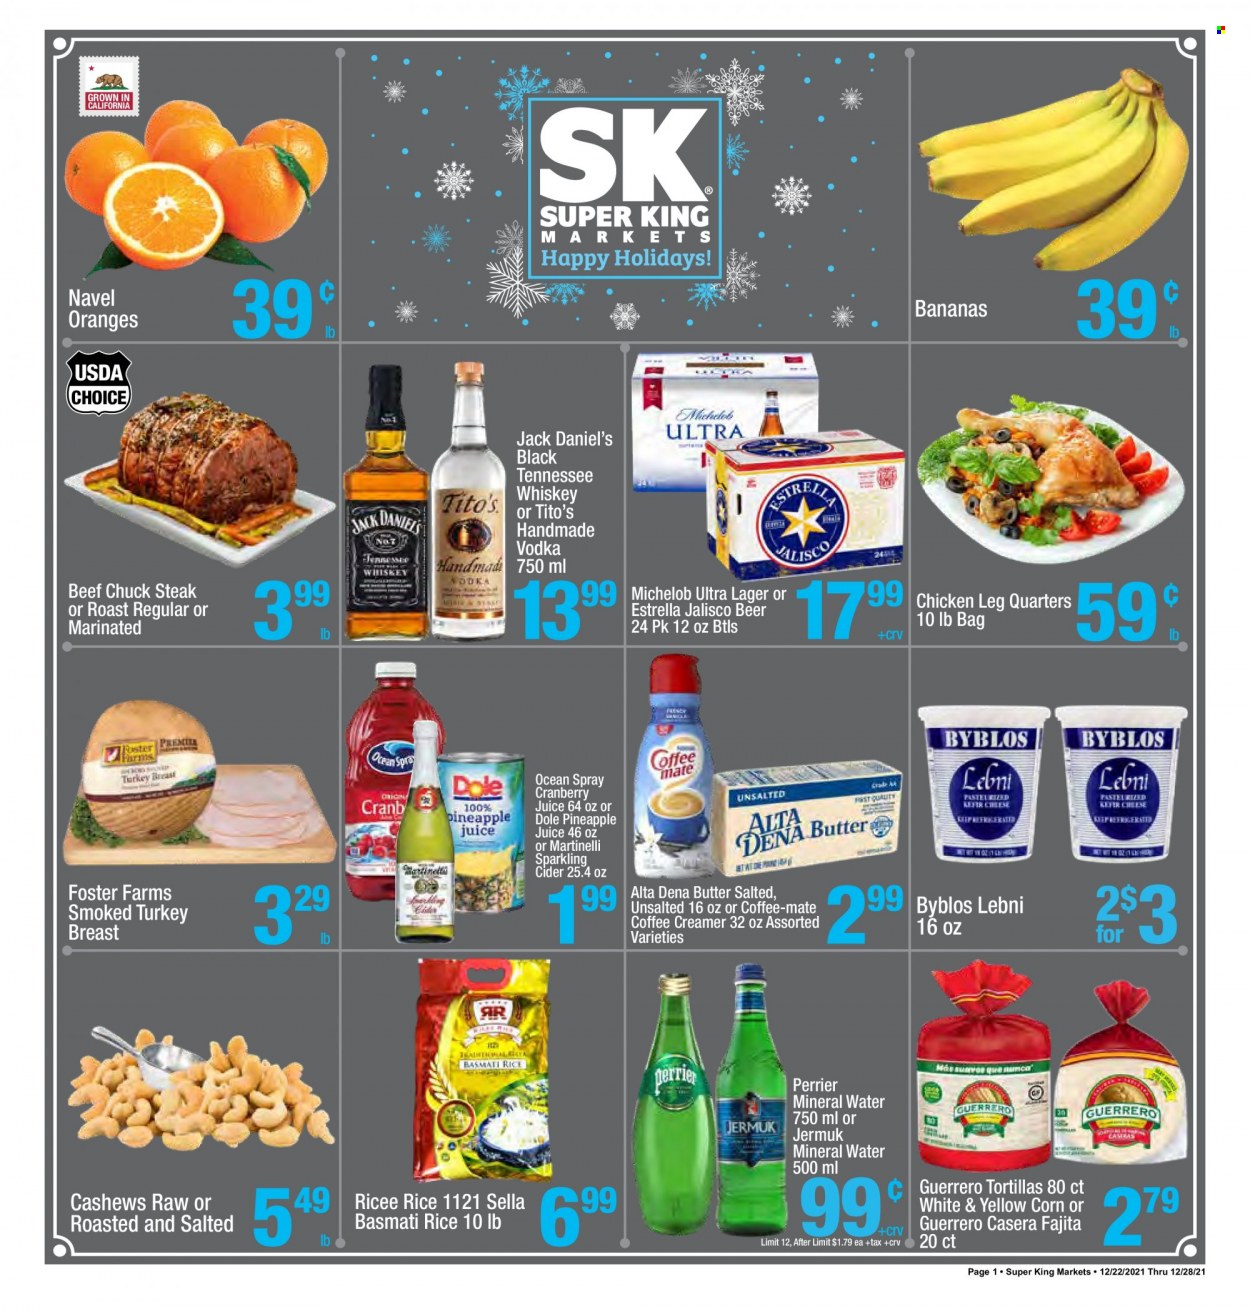 thumbnail - Super King Markets Flyer - 12/22/2021 - 12/28/2021 - Sales products - tortillas, corn, Dole, bananas, pineapple, oranges, chicken legs, beef meat, steak, chuck steak, Jack Daniel's, fajita, Coffee-Mate, butter, creamer, basmati rice, rice, cashews, cranberry juice, pineapple juice, juice, Perrier, mineral water, sparkling cider, sparkling wine, Tennessee Whiskey, vodka, whiskey, whisky, cider, beer, Lager, Michelob, navel oranges. Page 1.